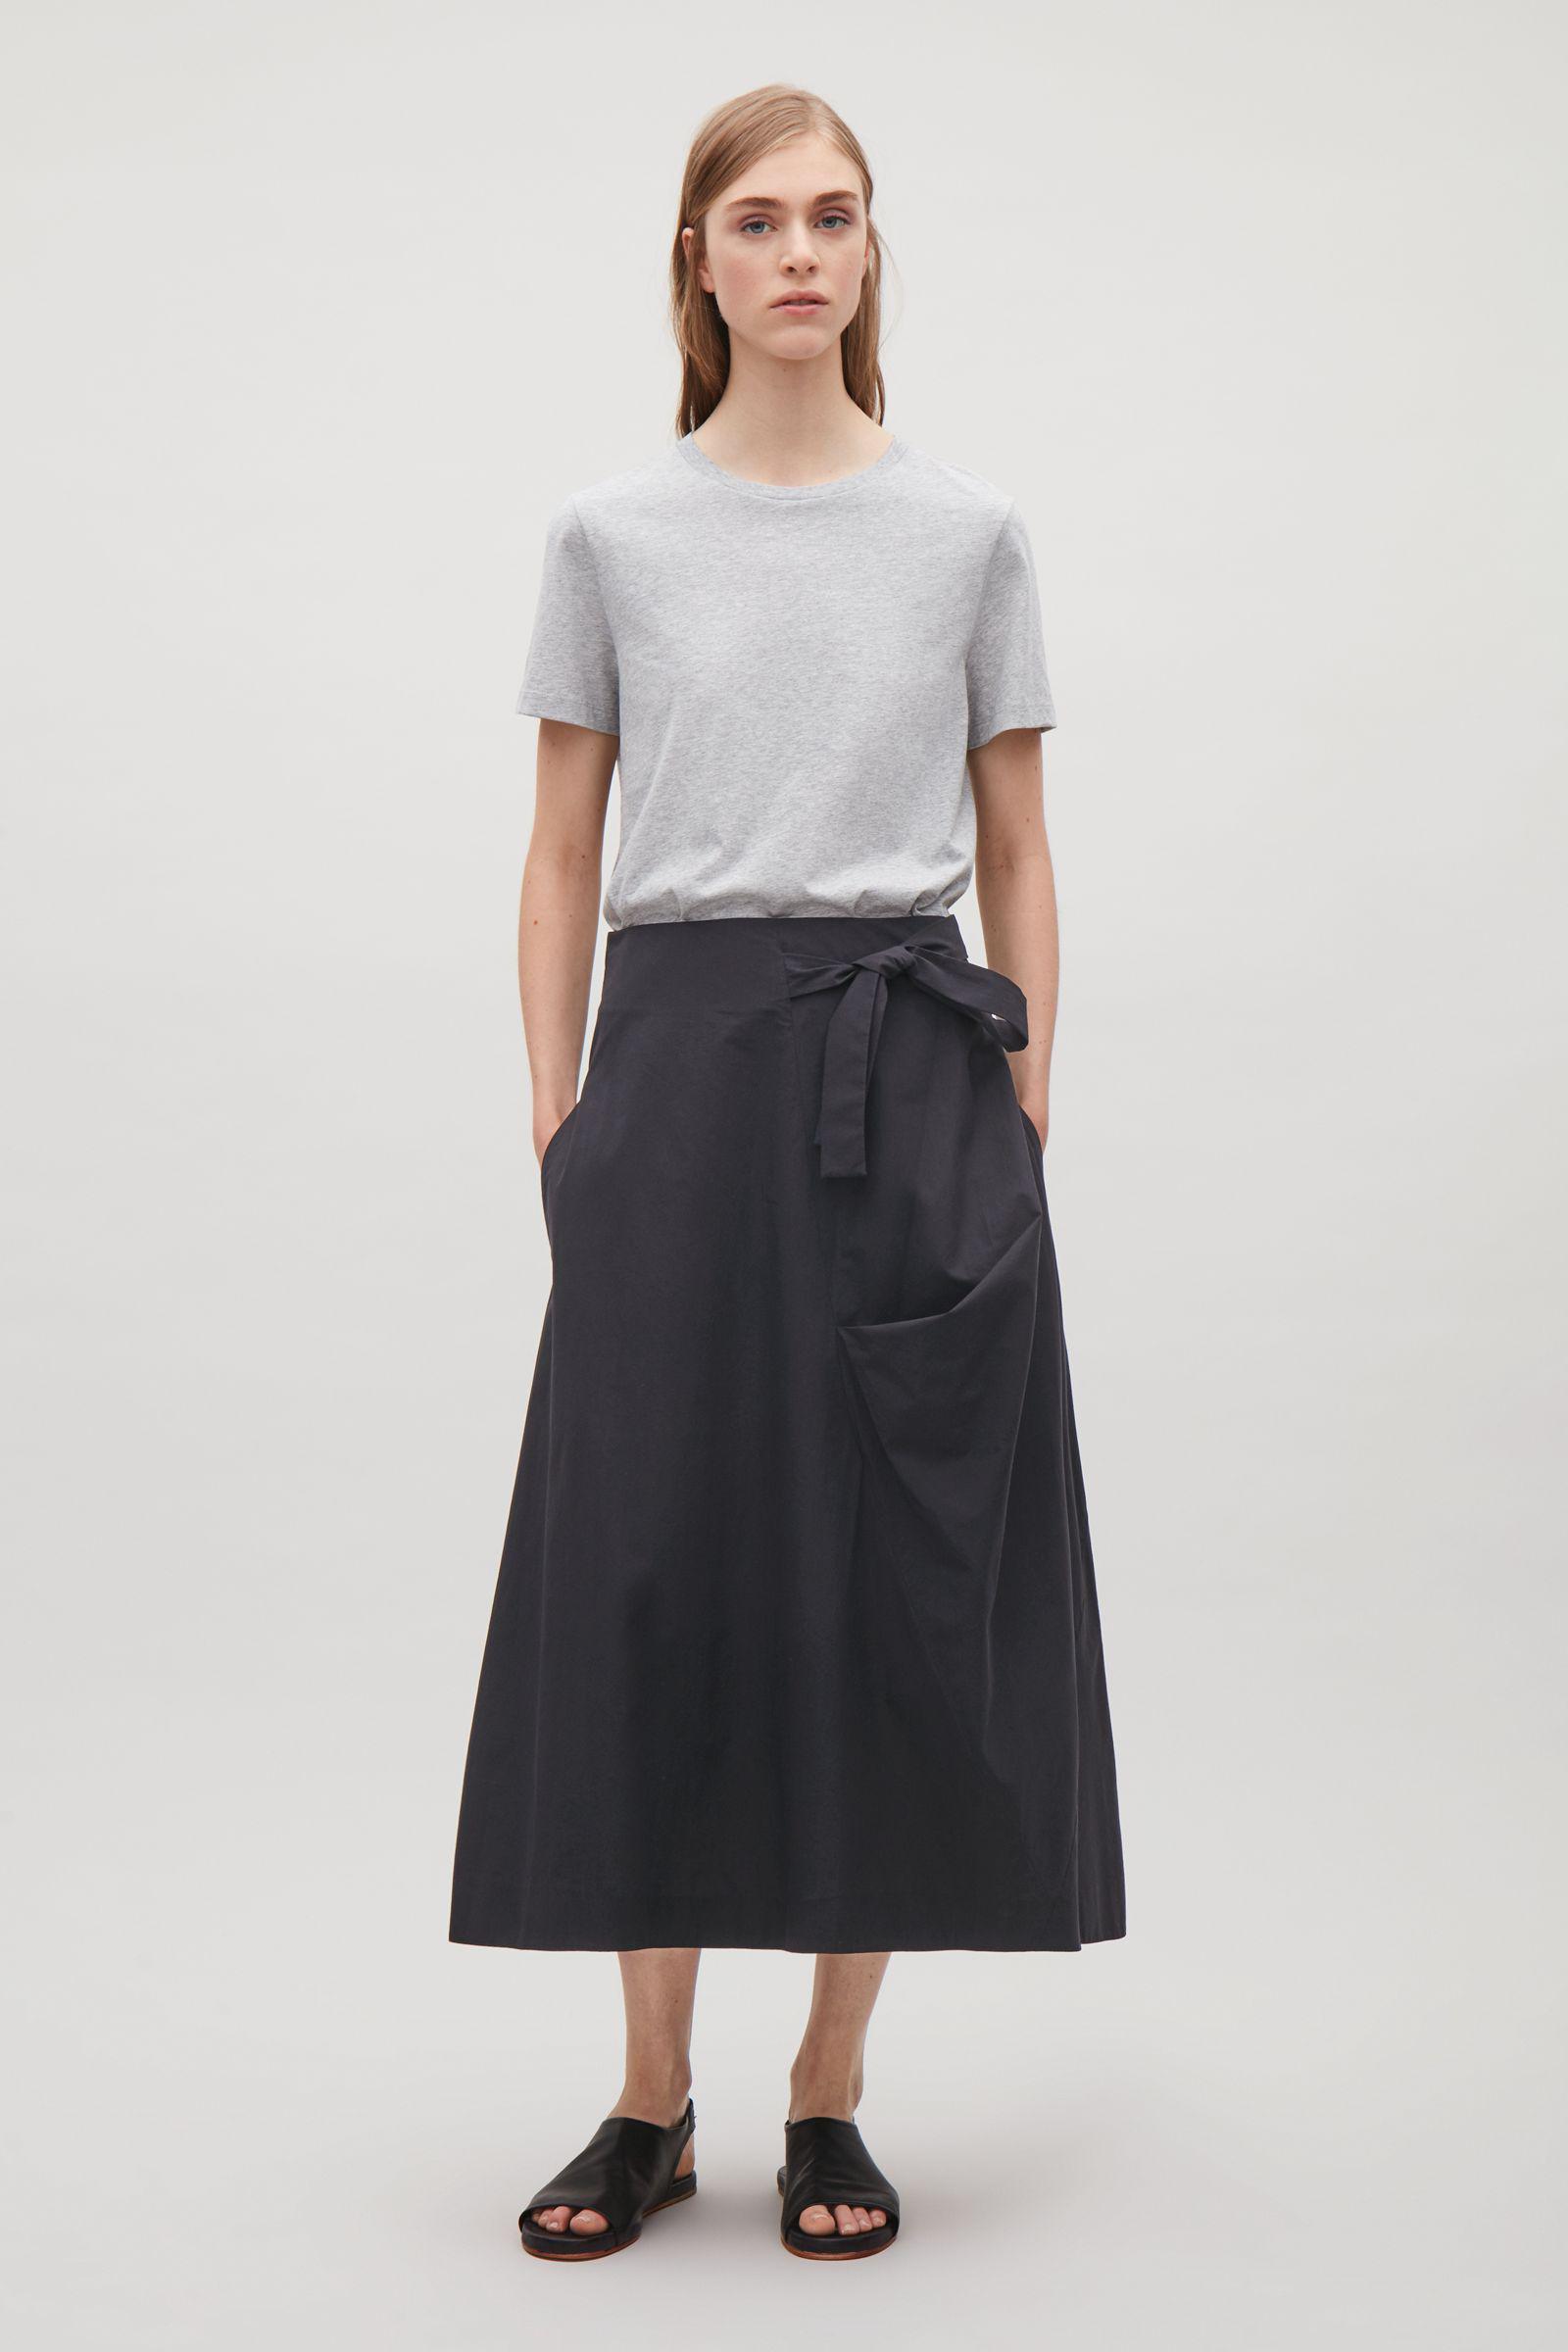 COS A-line Skirt in Black Lyst